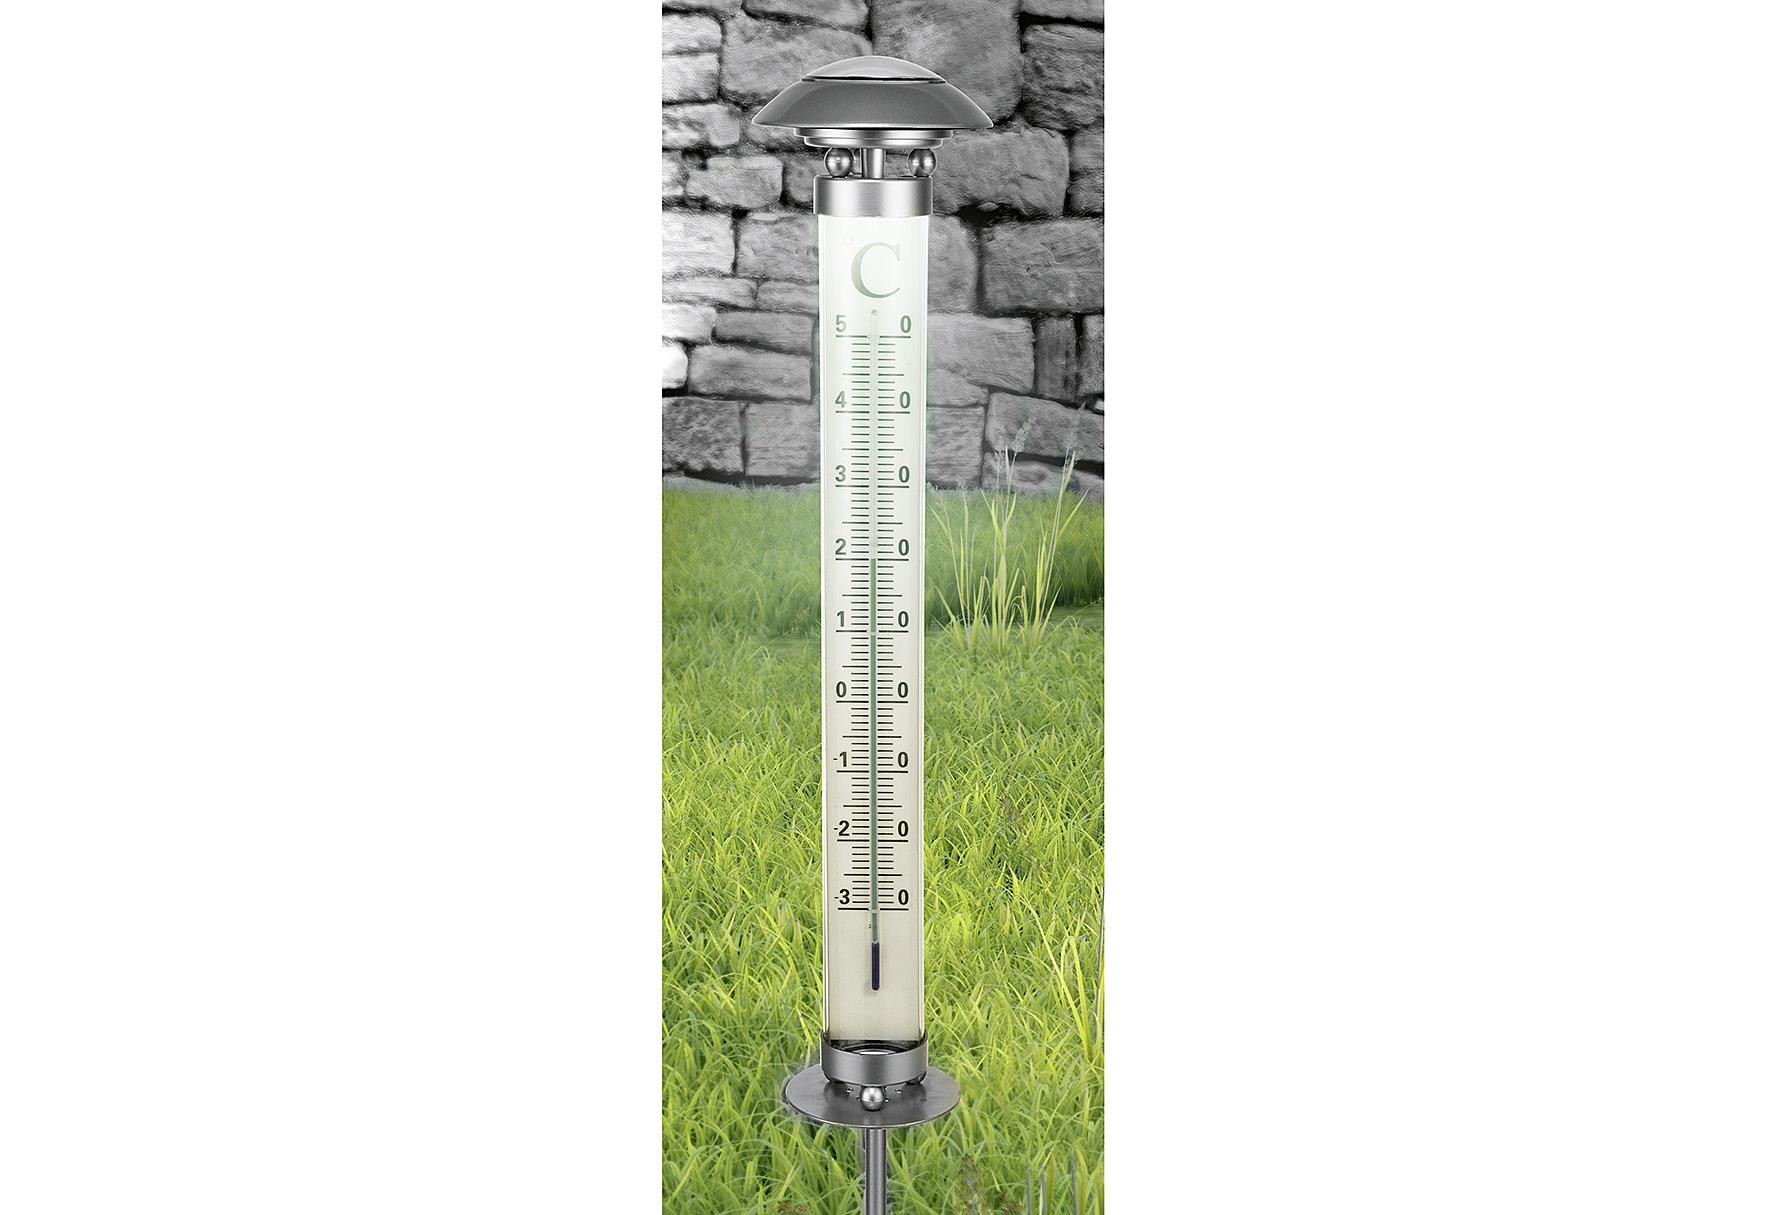 HI Thermometer inkl. 1x Mignon AA Batterie